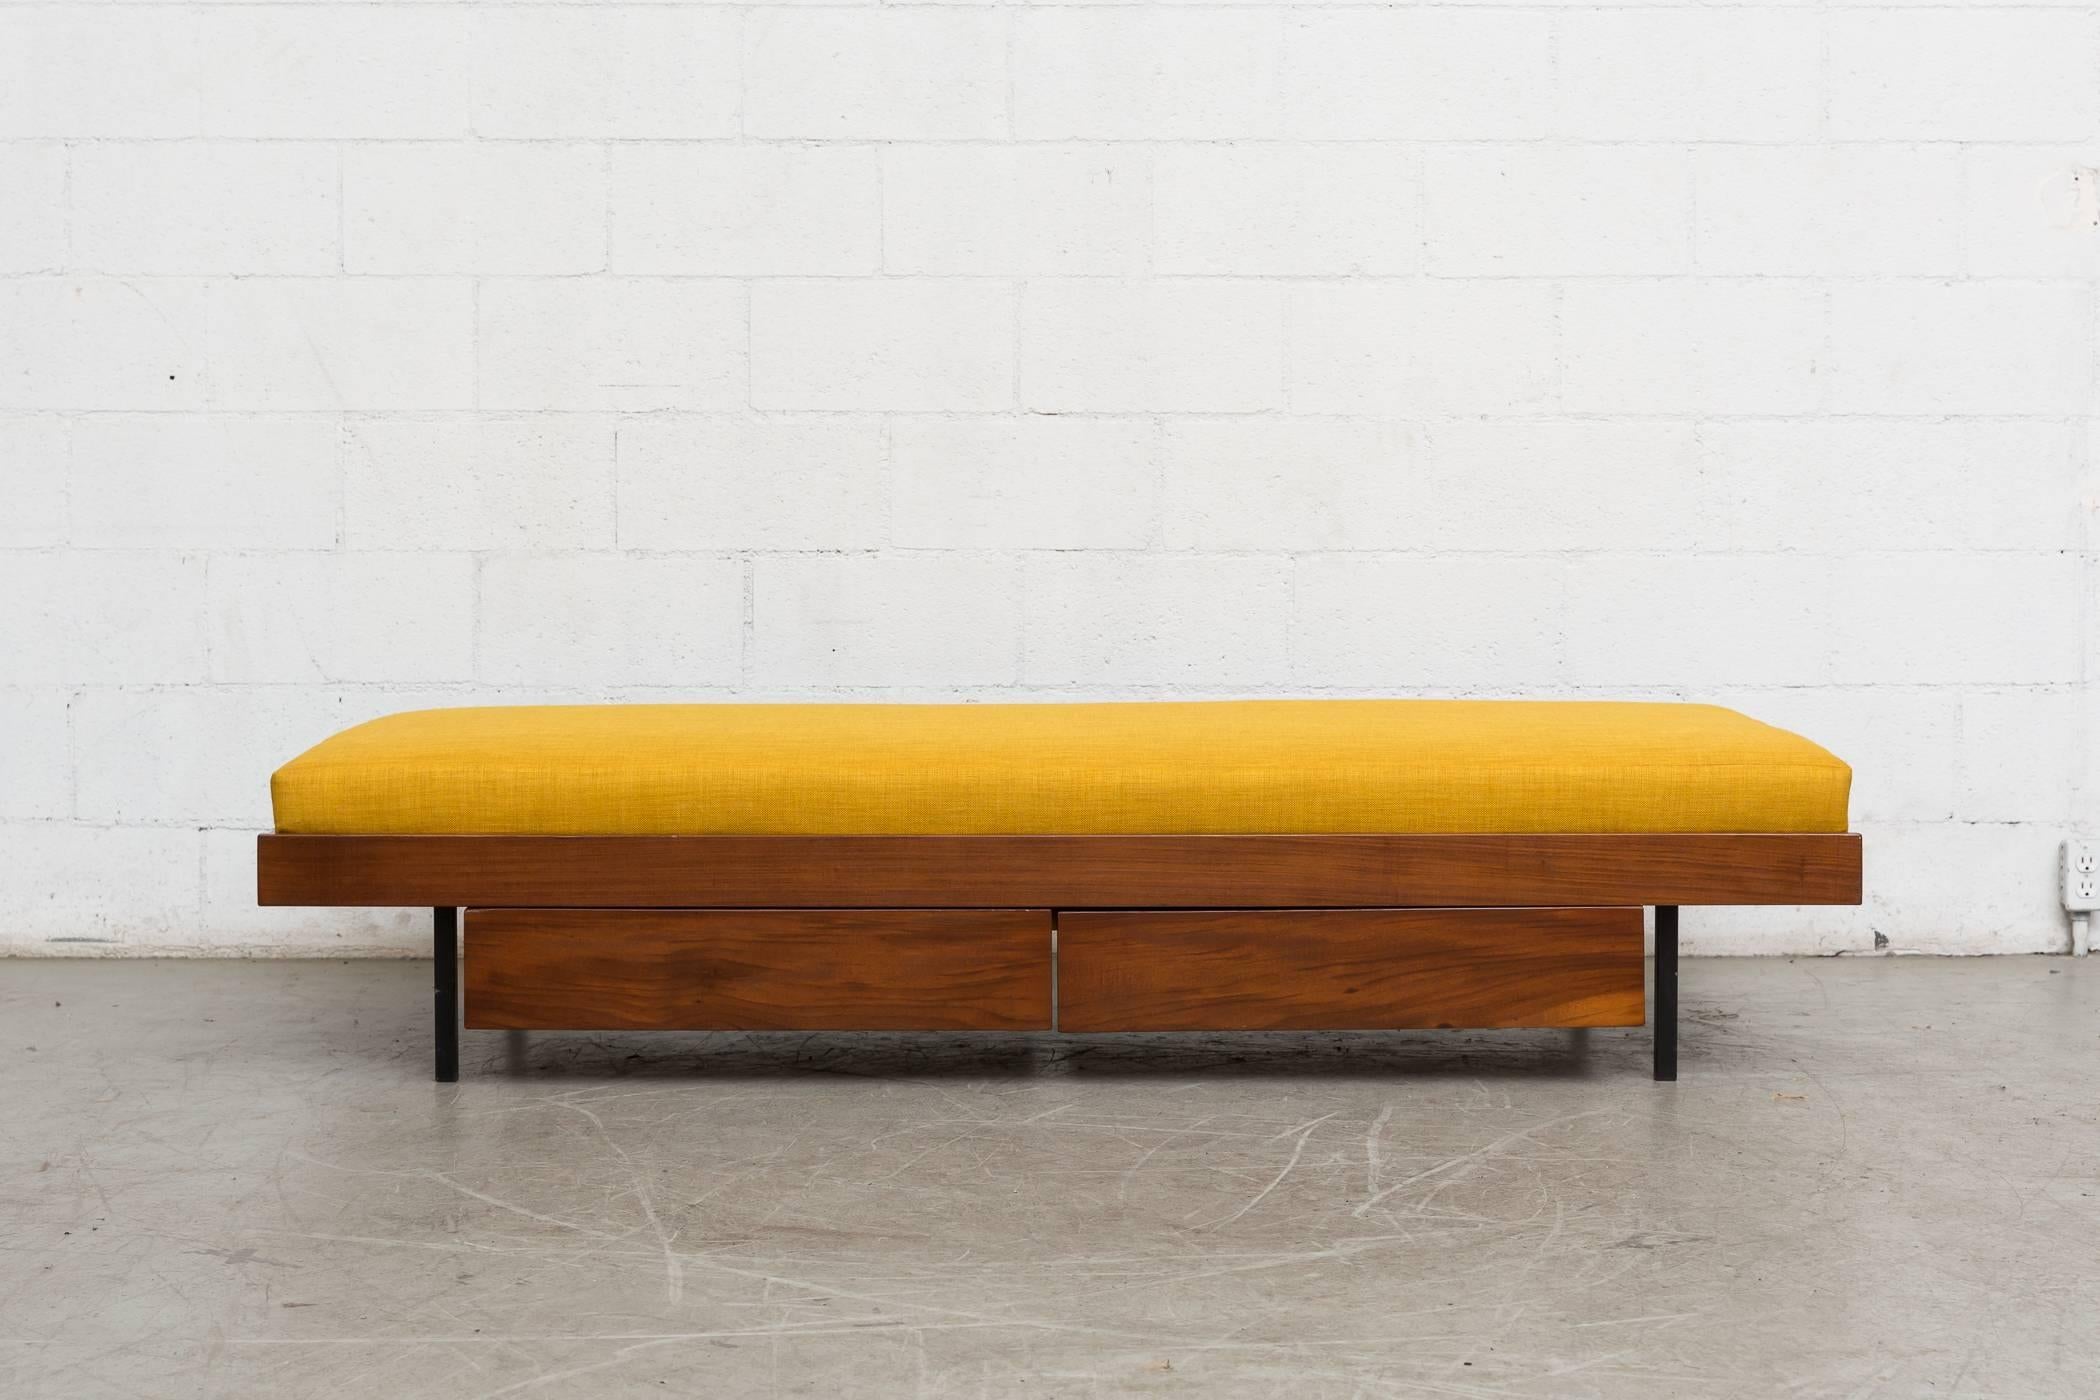 Lightly refinished midcentury teak daybed with double lower storage drawers and black enameled metal legs. New mustard yellow upholstered mattress. In good original condition.